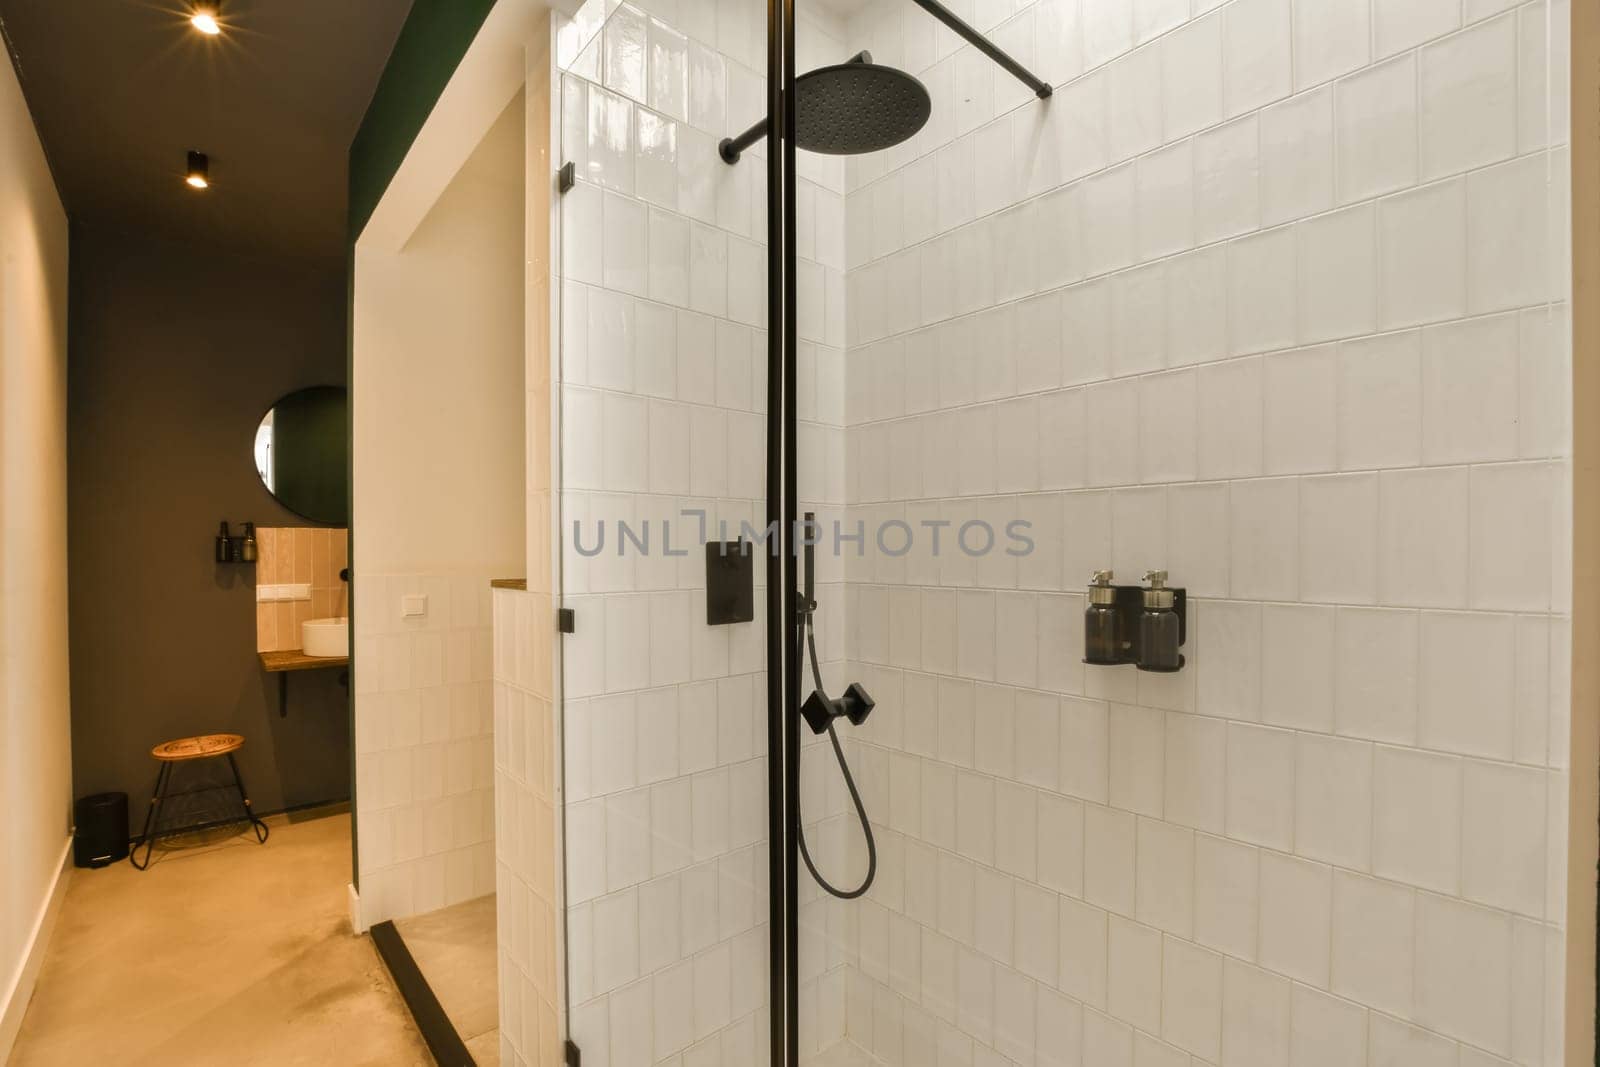 a bathroom with white tiles on the walls and black trim around the shower head, which is attached to the wall